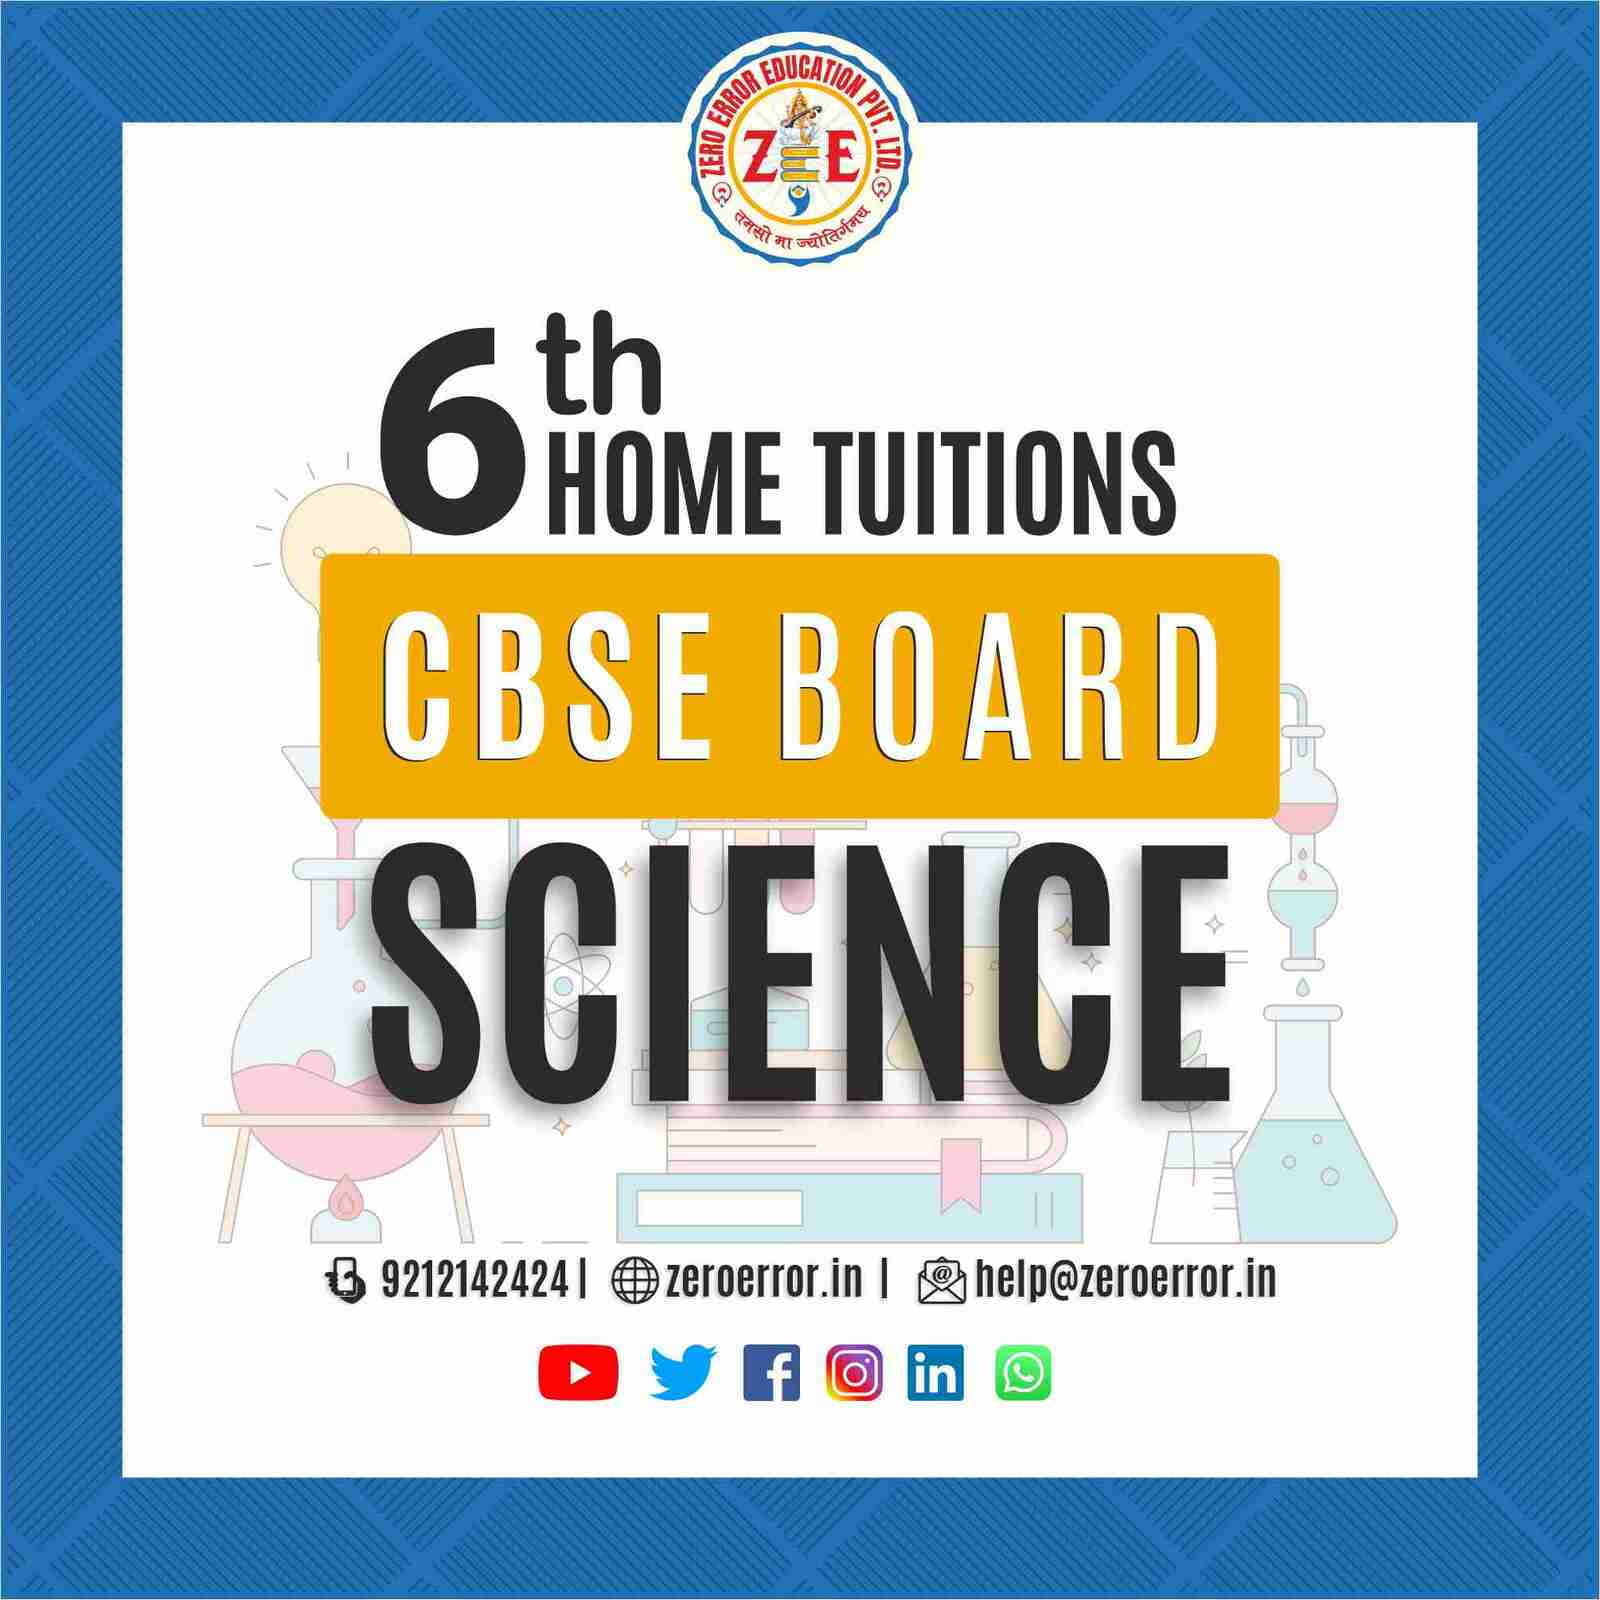 6th Grade CBSE Science Online Classes by Zero Error Education Prepare for your CBSE board exams with online and offline Science classes for 6th grade. Learn from experienced home tutors and get all the help you need to succeed. Enroll today at Zero Error Education. [https://zeroerror.in/] Call 9212142424 for more information.